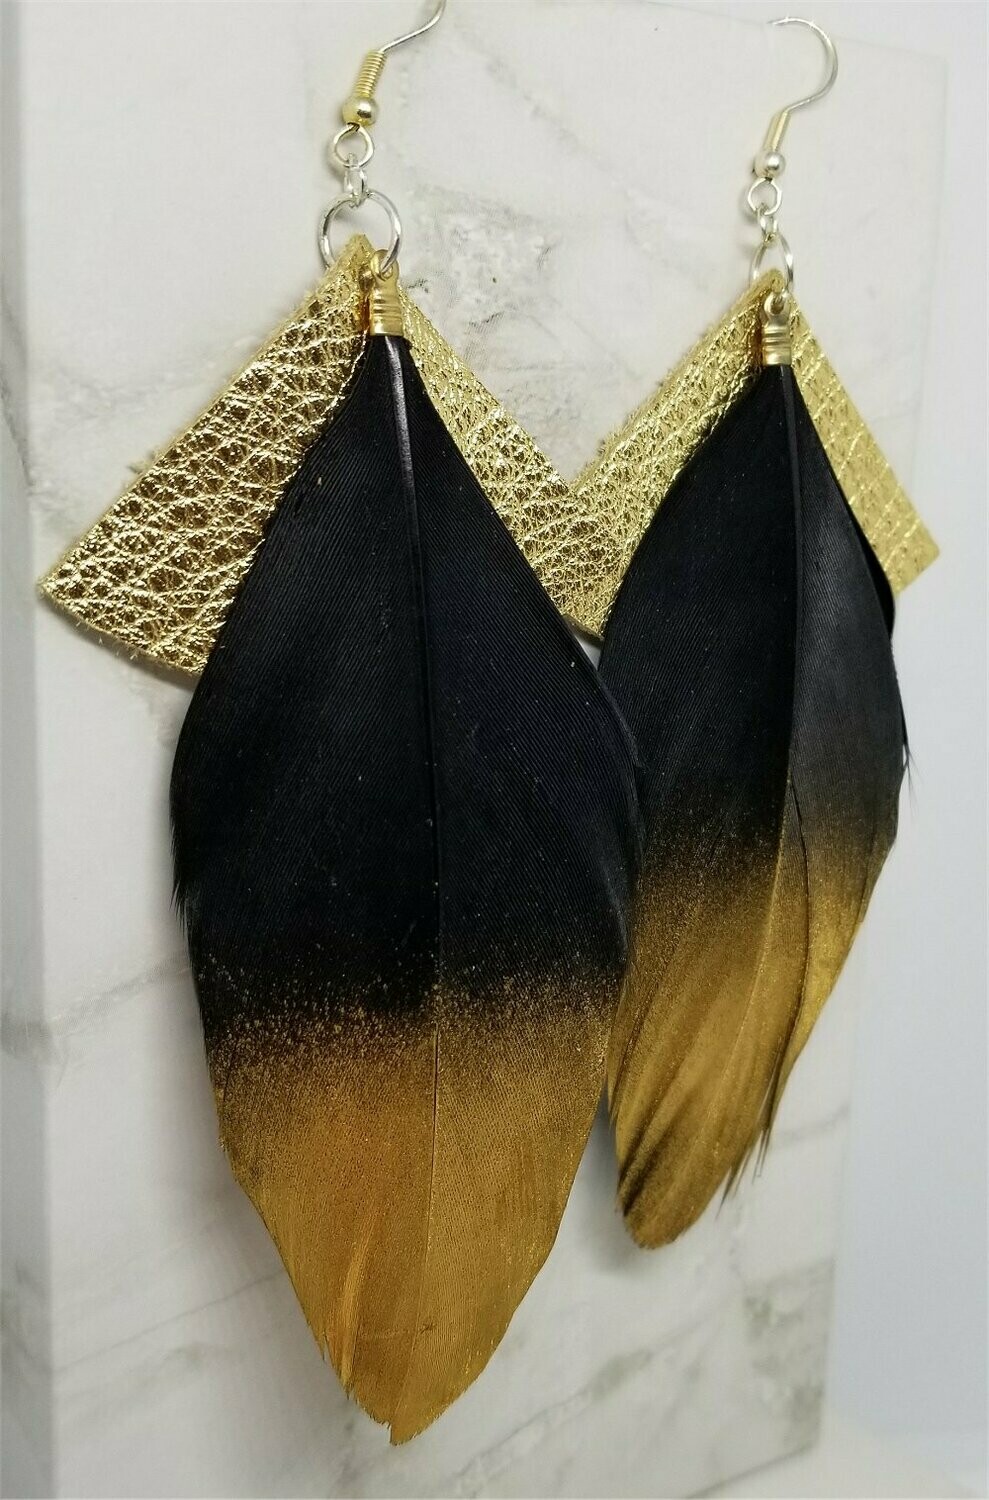 Metallic Gold Fan Shaped Leather Earrings with Black and Gold Feathers